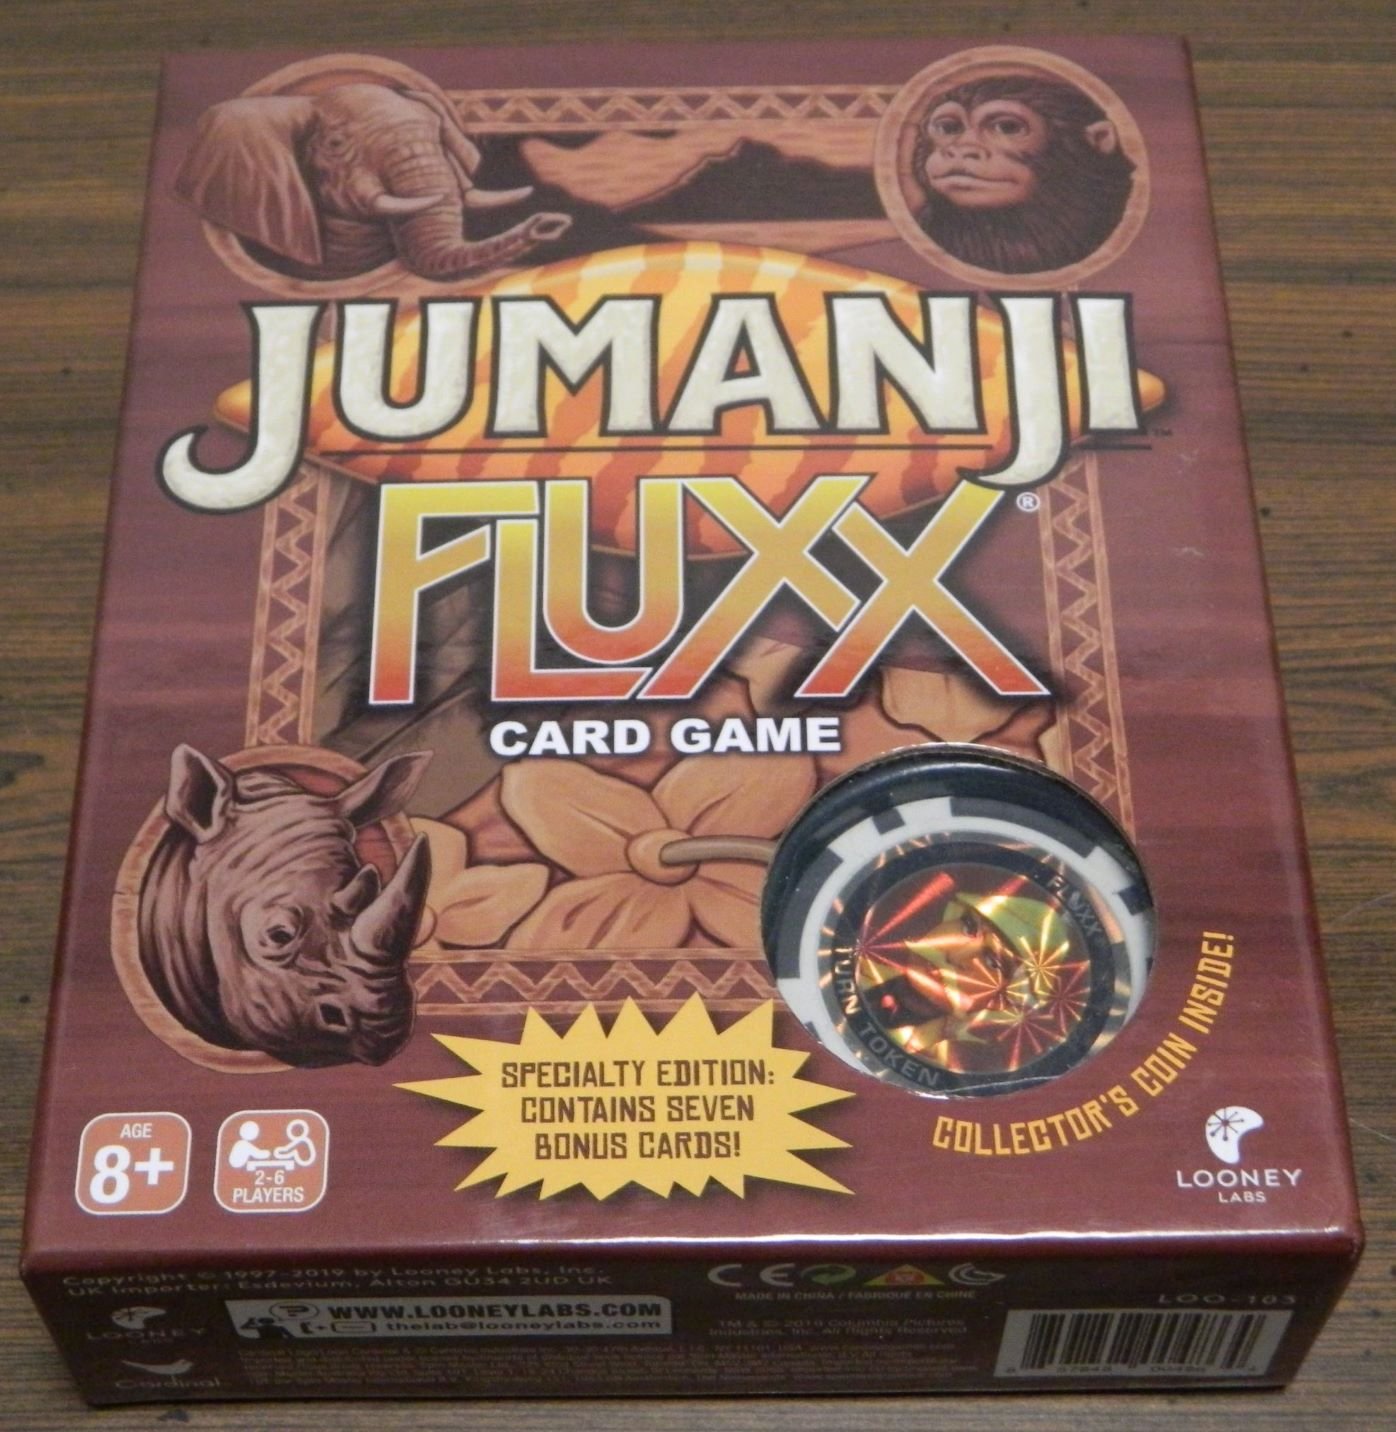 Jumanji Fluxx Card Game Review and Rules